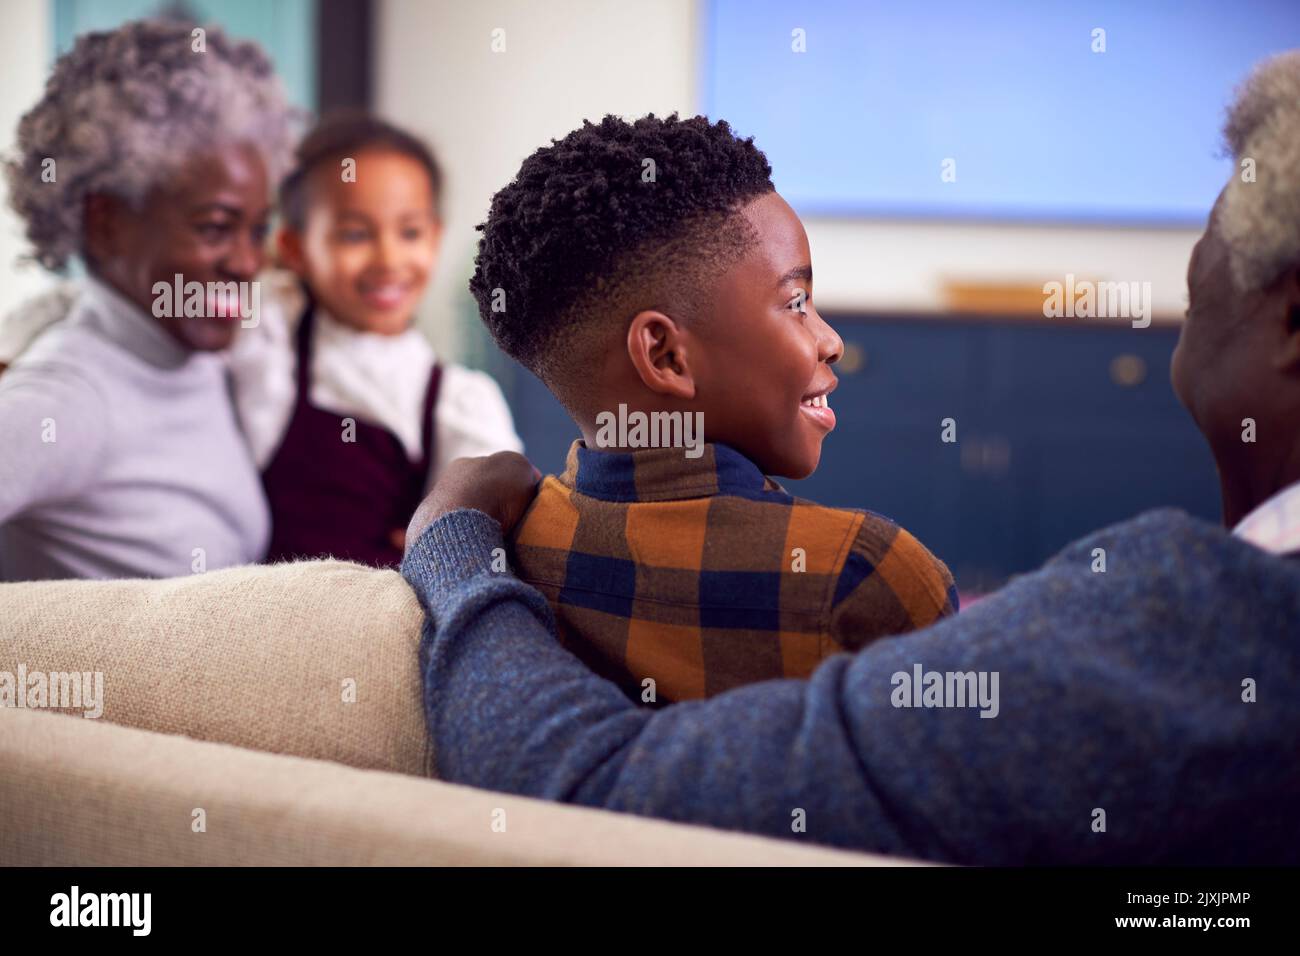 Rear View Of Grandparents With Grandchildren Sitting On Sofa Watching Movie On TV At Home Stock Photo